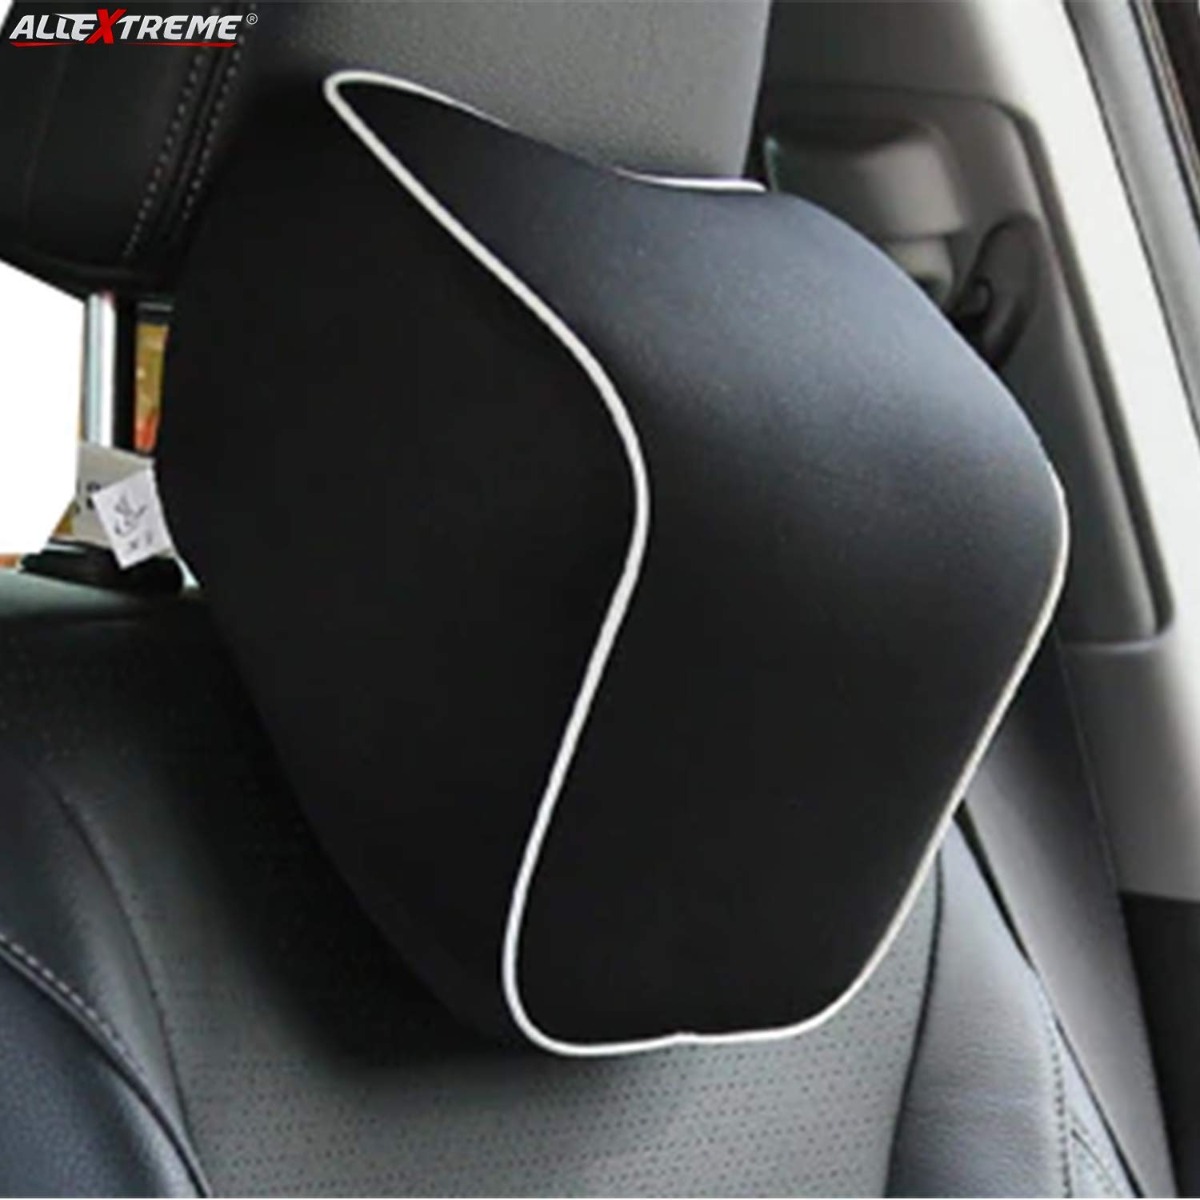 AllExtreme EXMFTC1 Memory Foam Car Seat Neck Pillow Headrest Travel Cushion  for Cervical Support & Sleeping